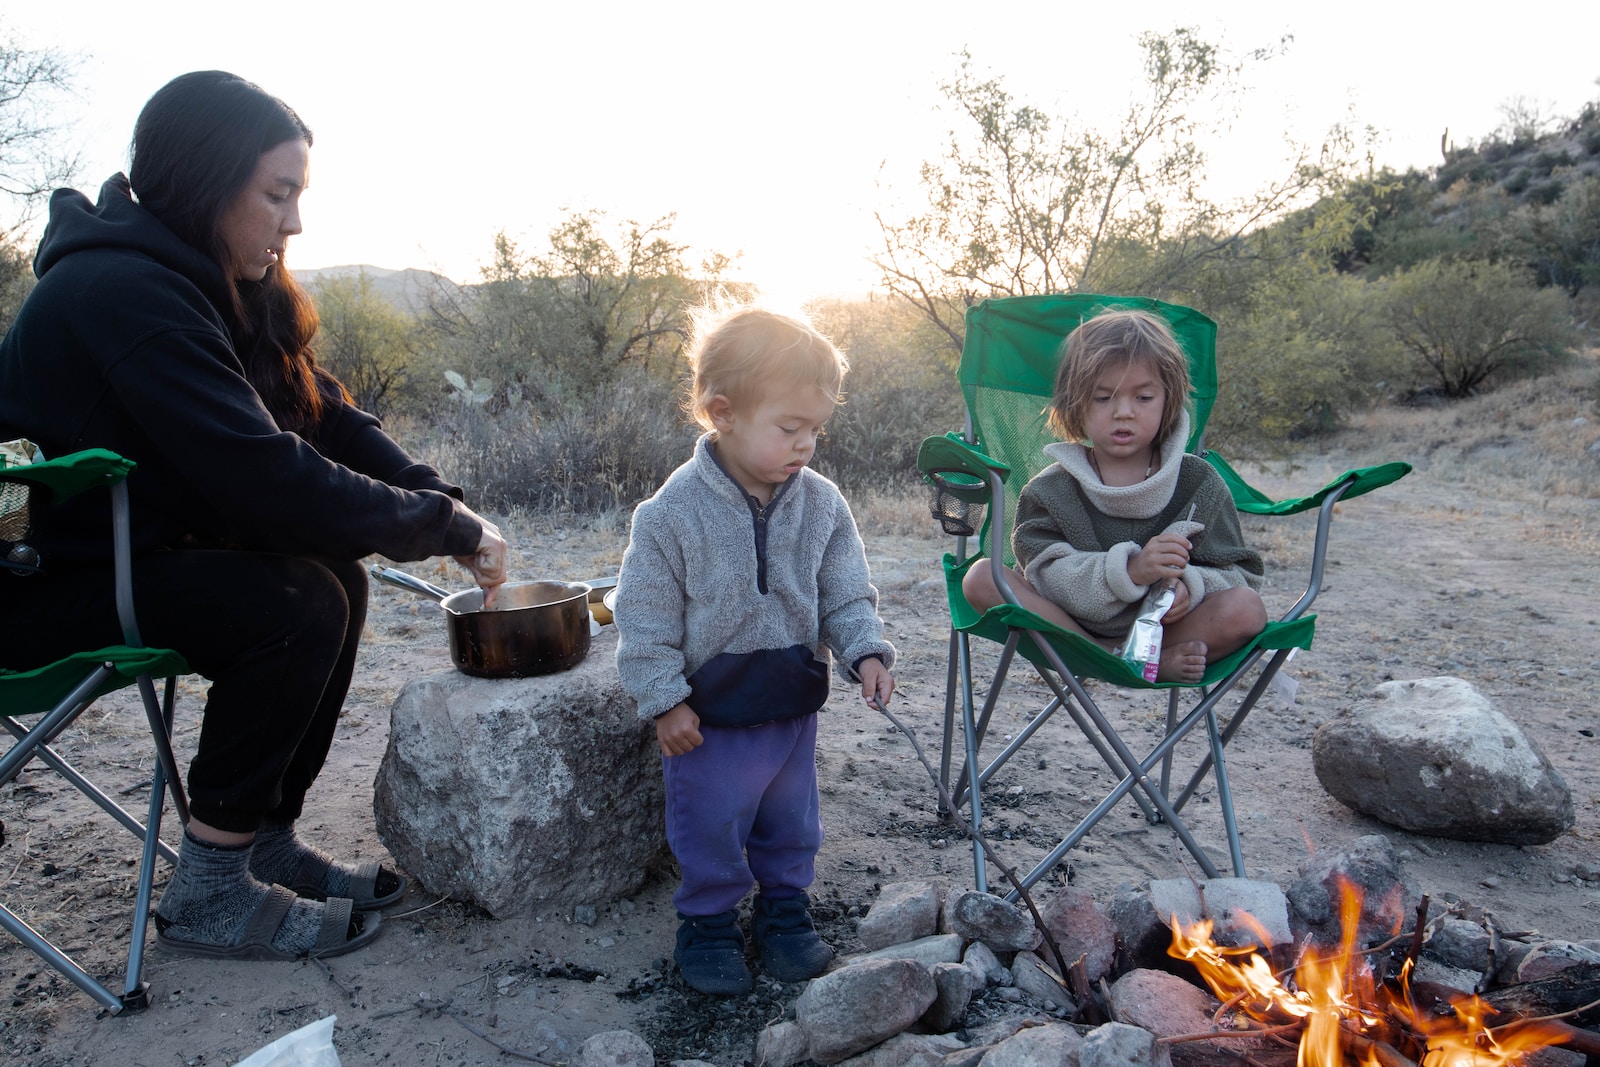 Campfire safety tips for kids